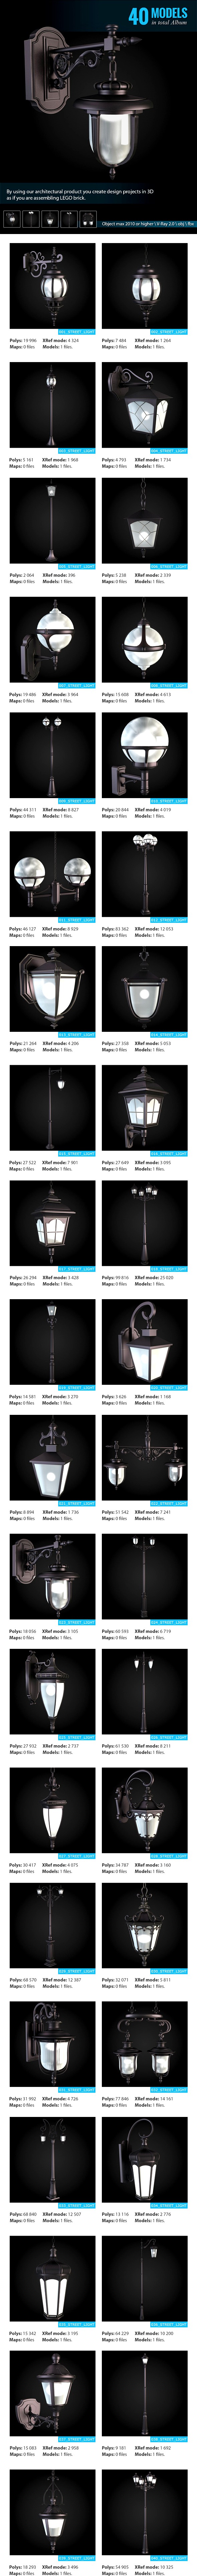 Street Lights Collection